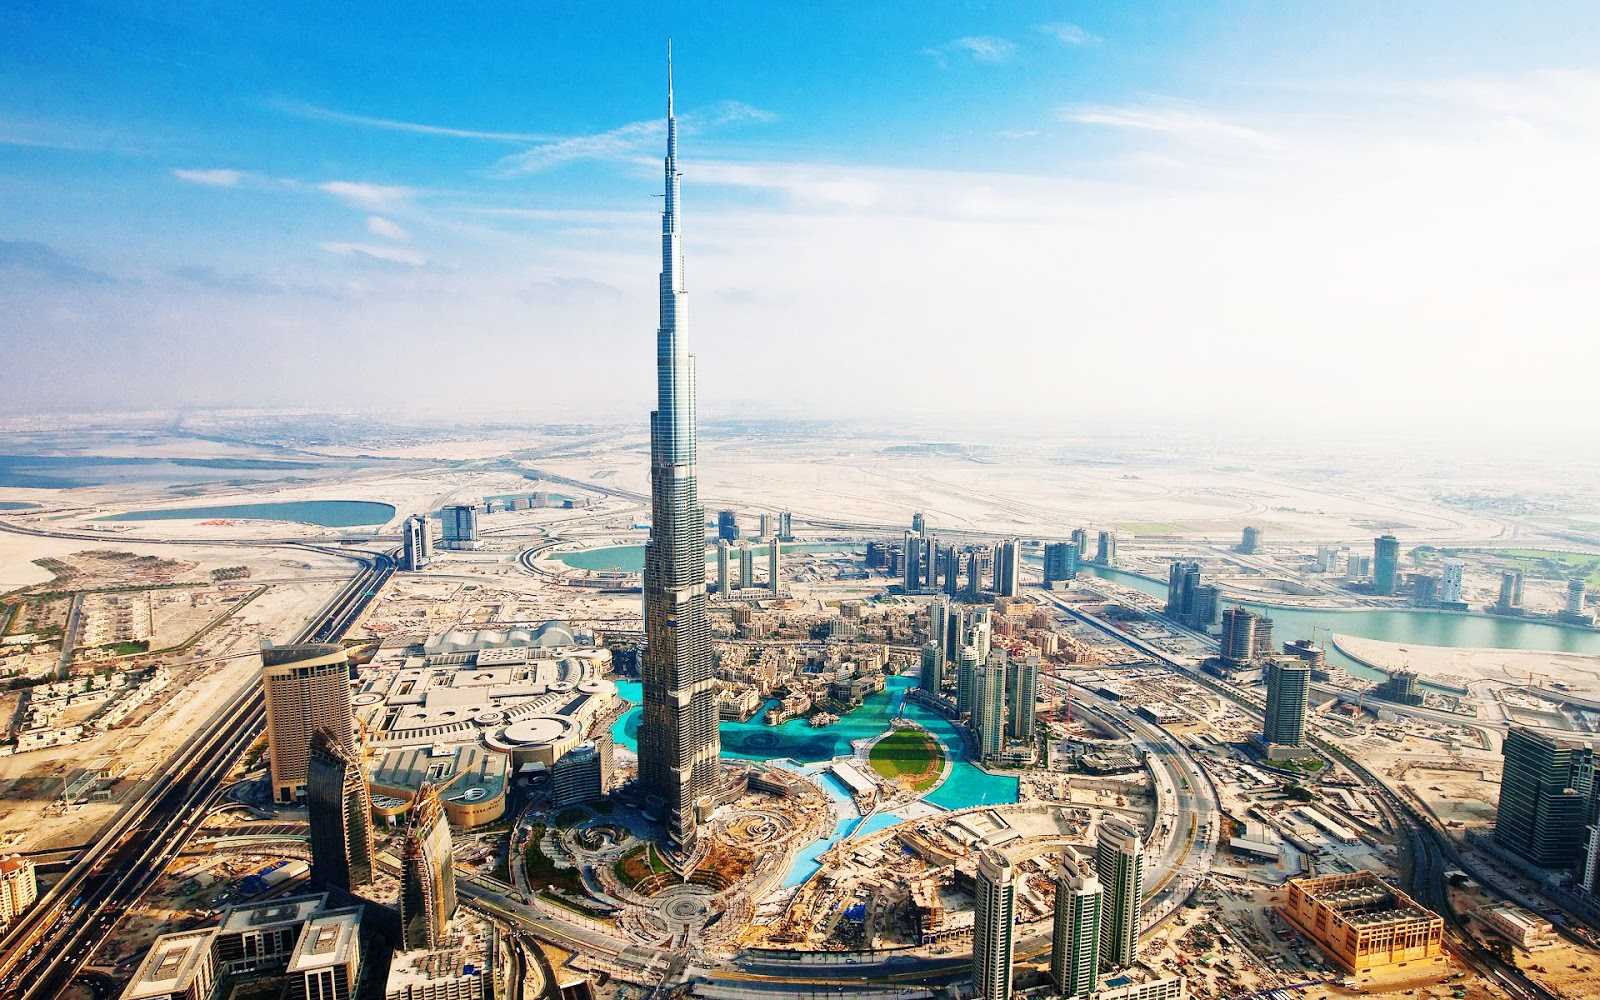 Lovely 5 day Dubai itinerary for the Honeymoon travellers